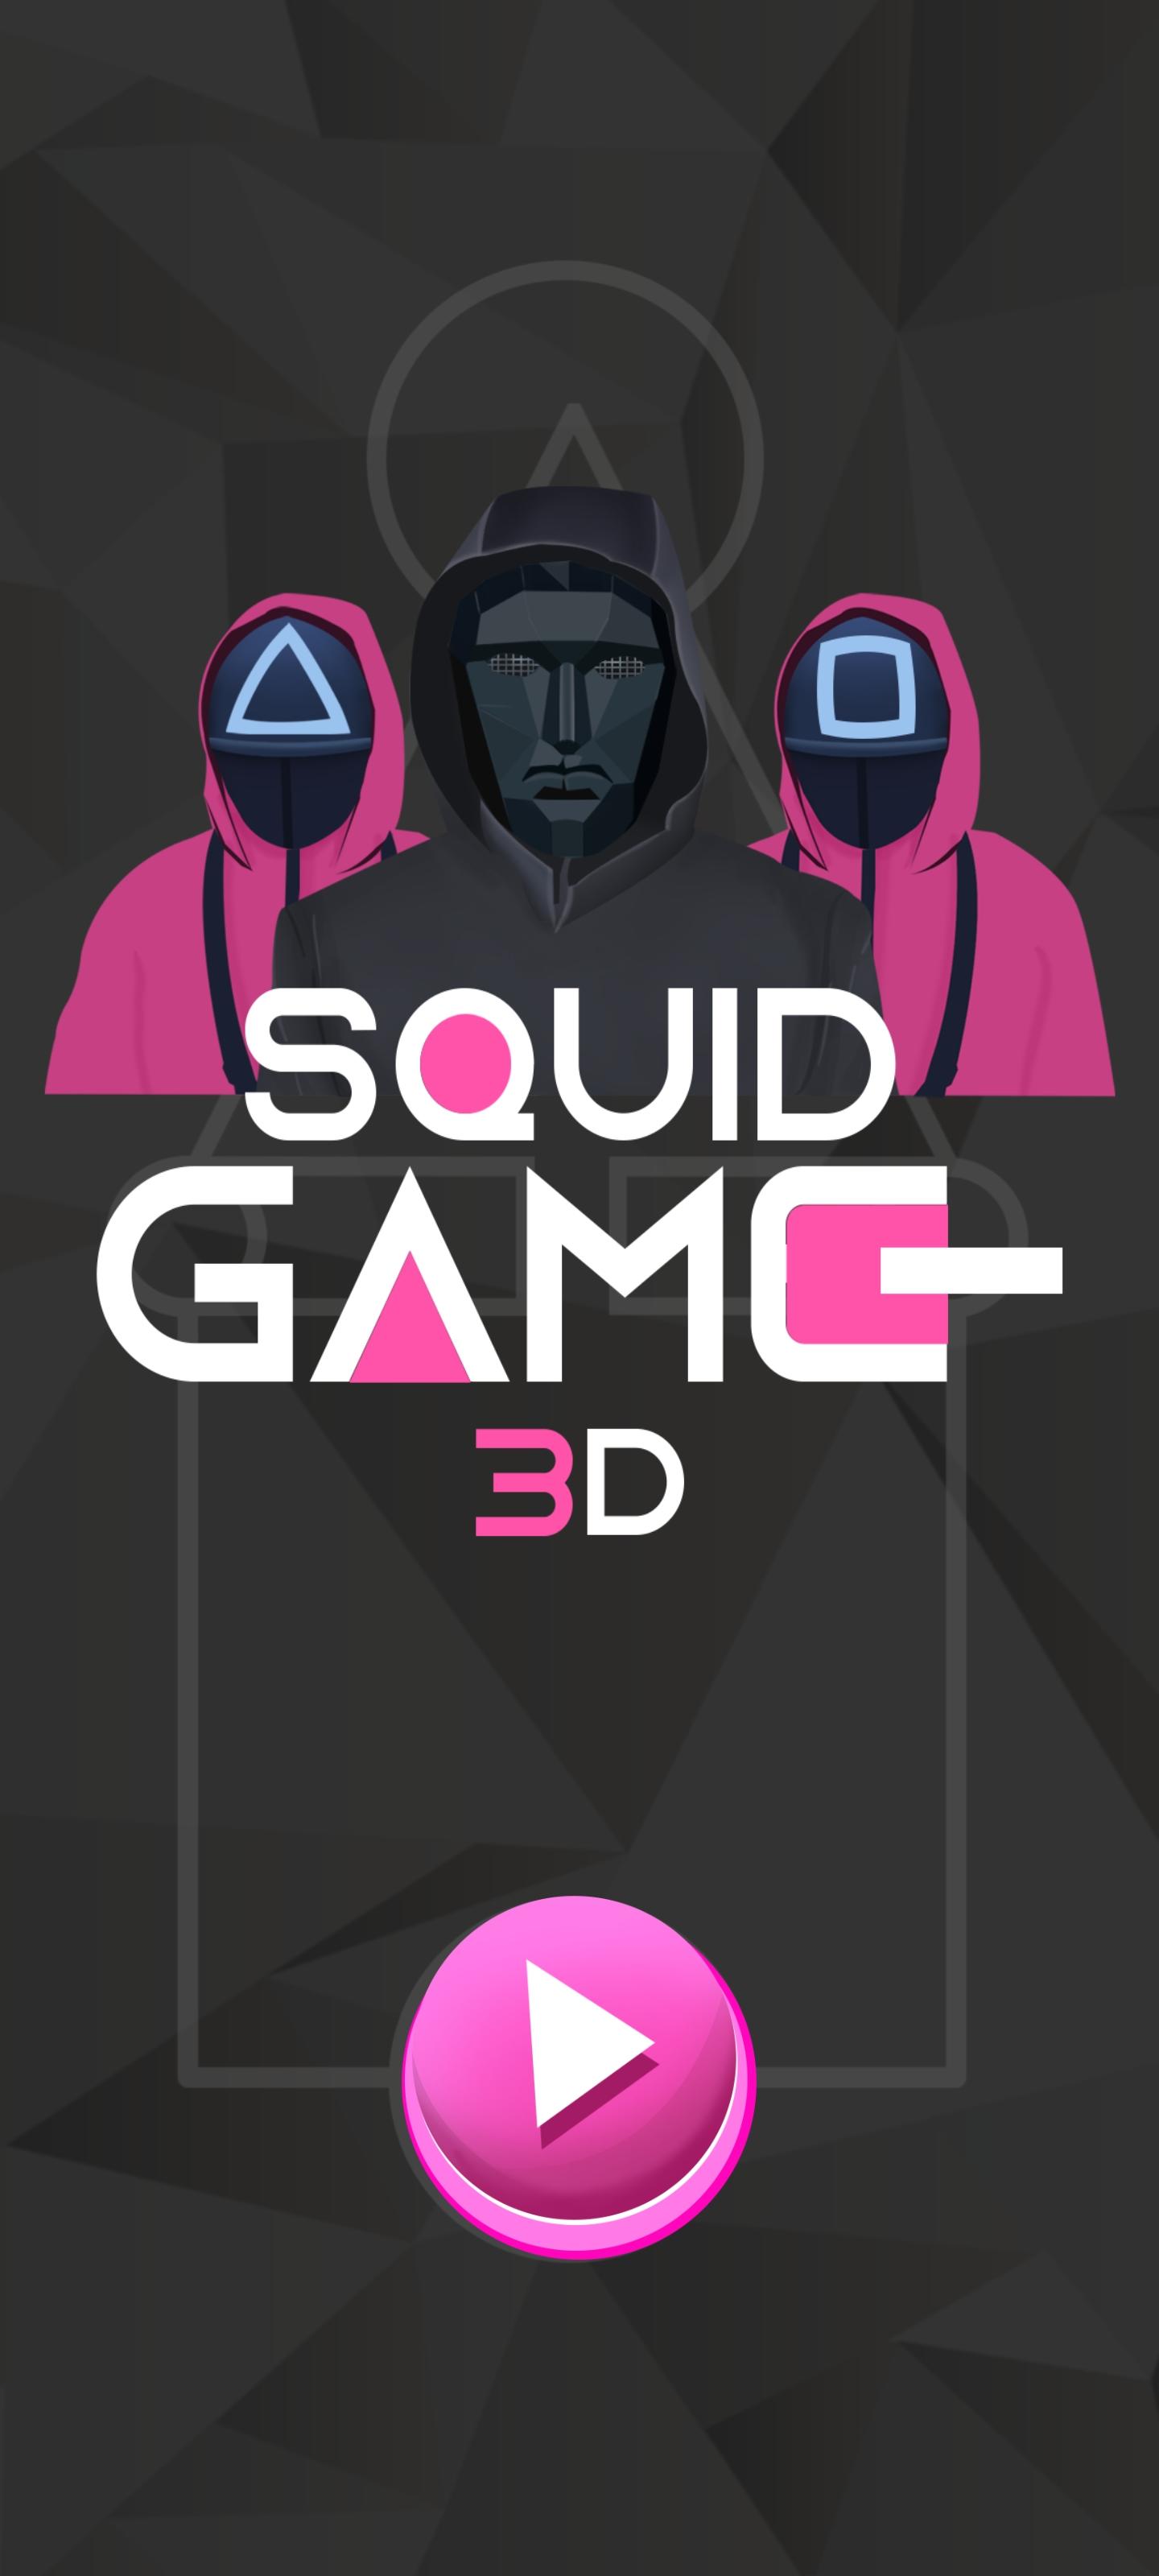 Squid Game 3D Mobile Android Ios Apk Download For Free-Taptap